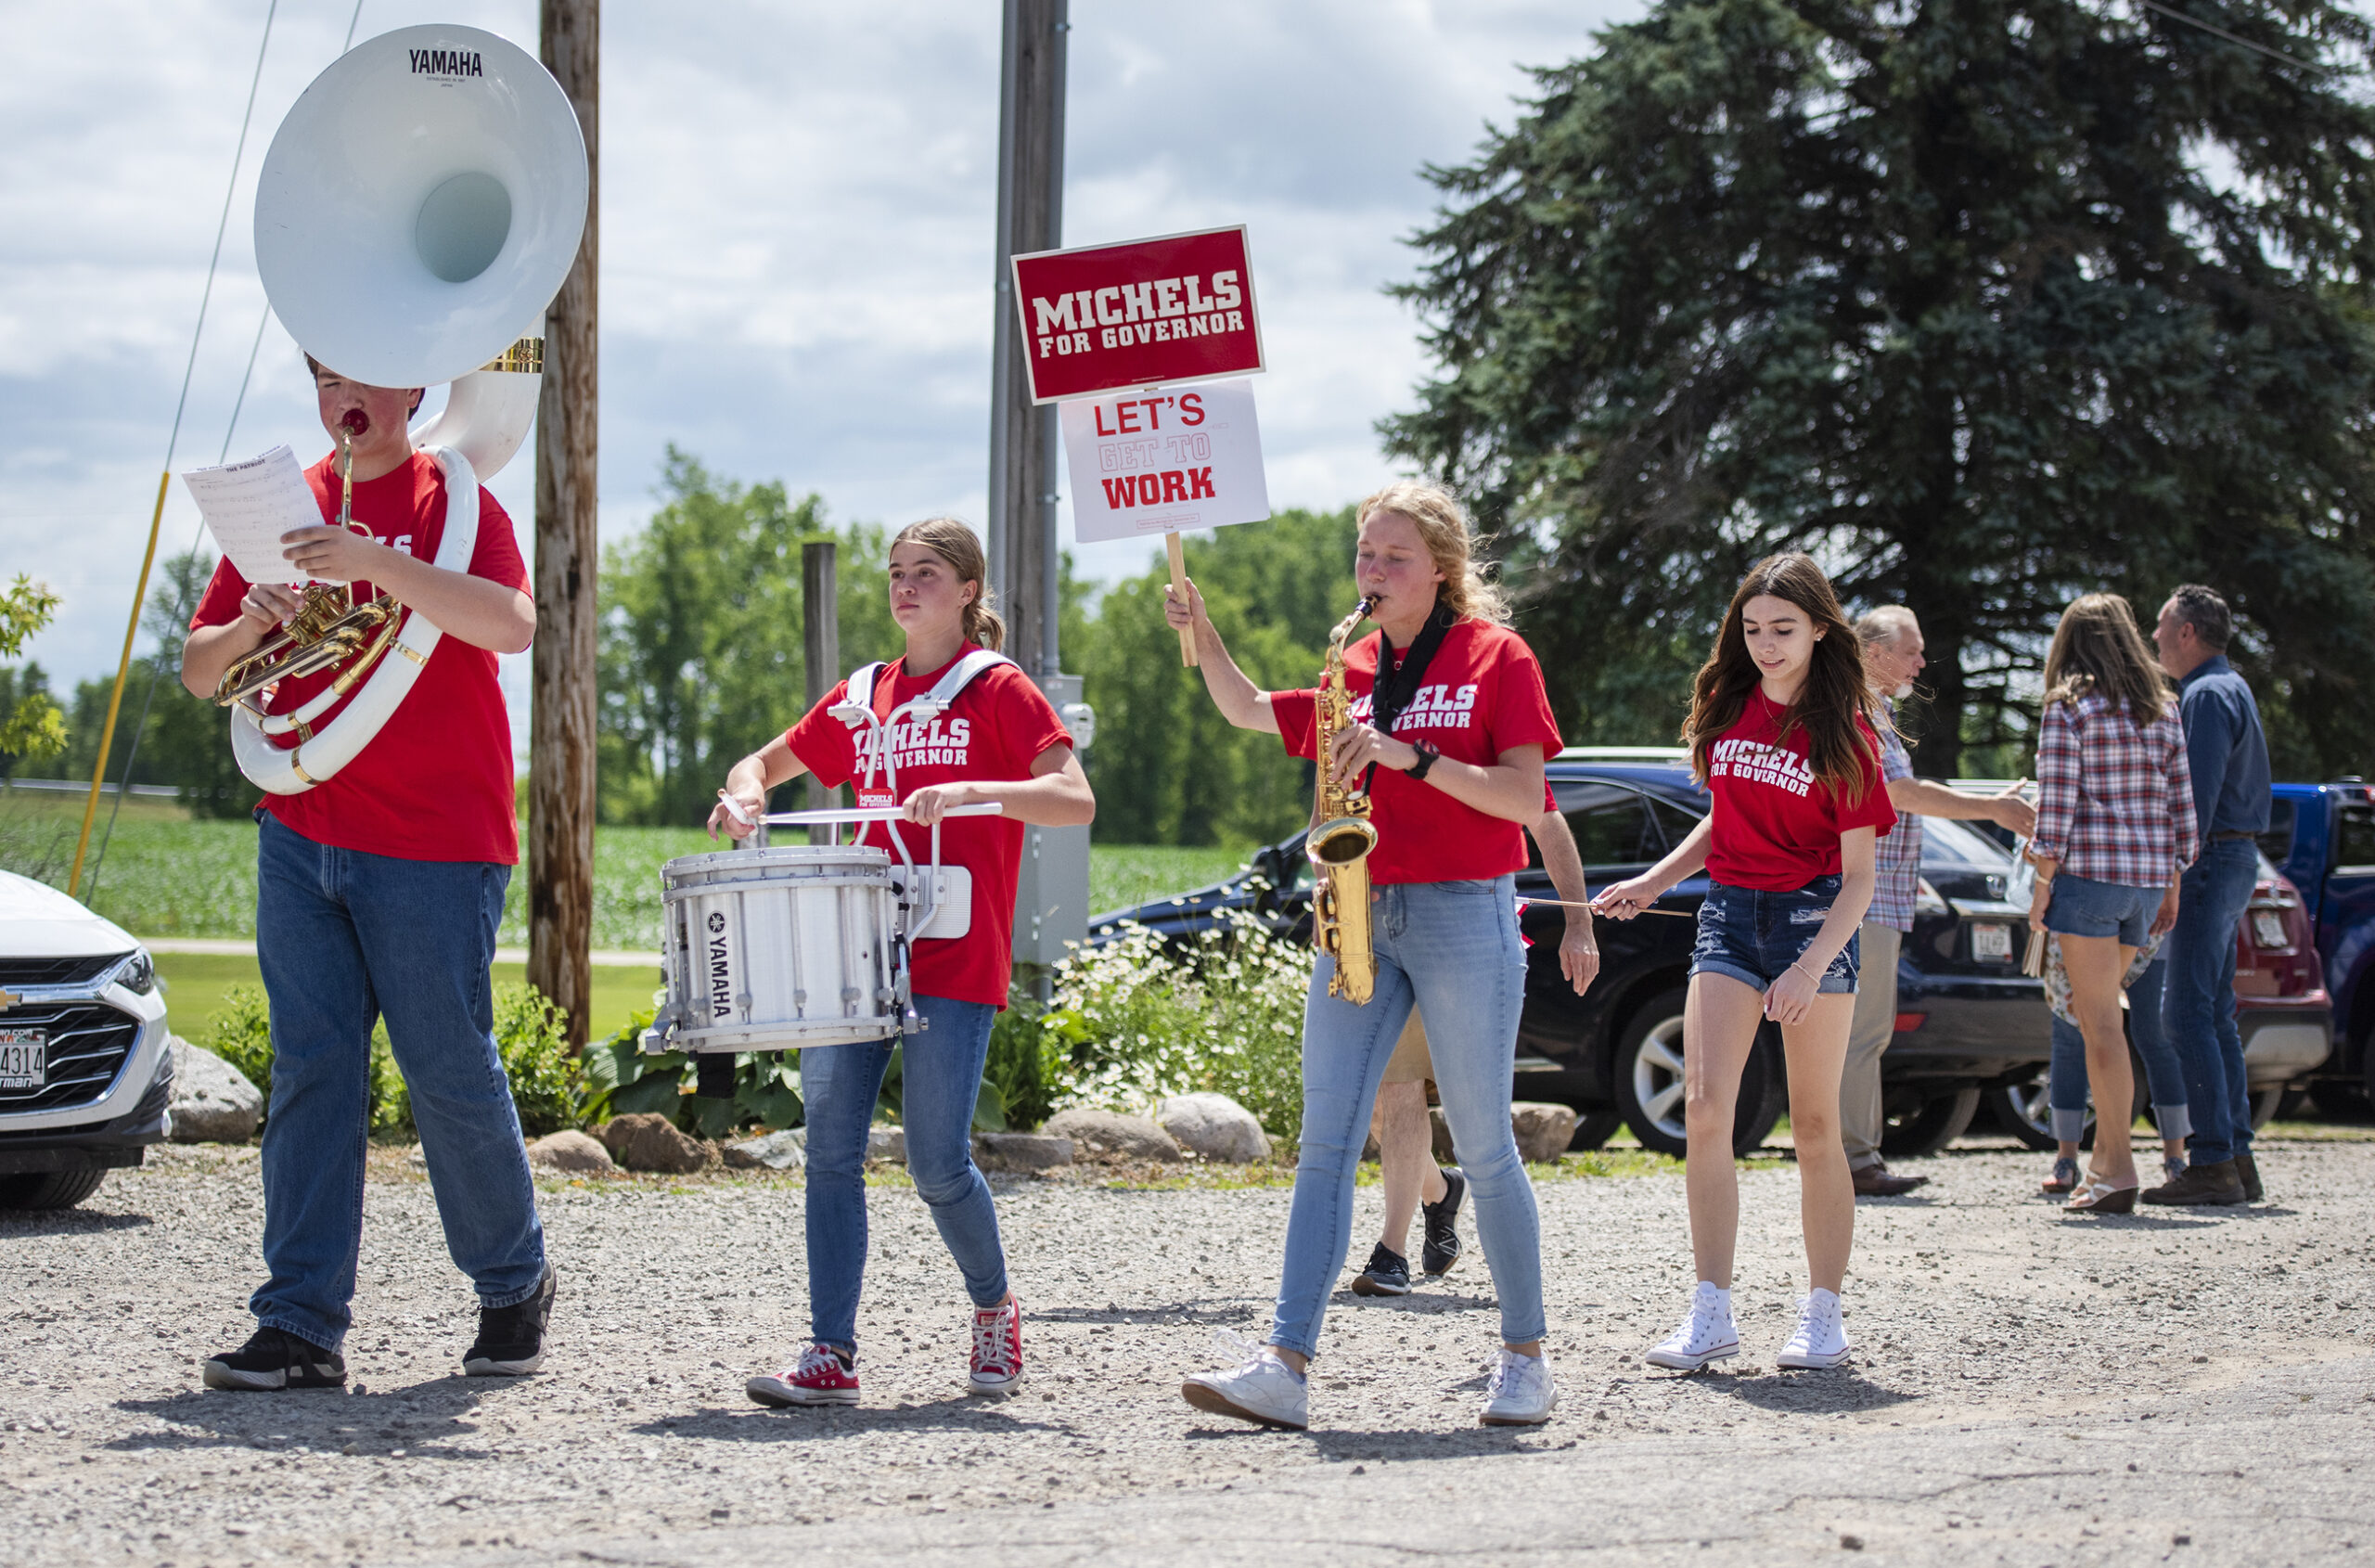 Musicians playing a sousaphone, snare drum and saxophone wear matching red shirts as they play outside of a golf club.